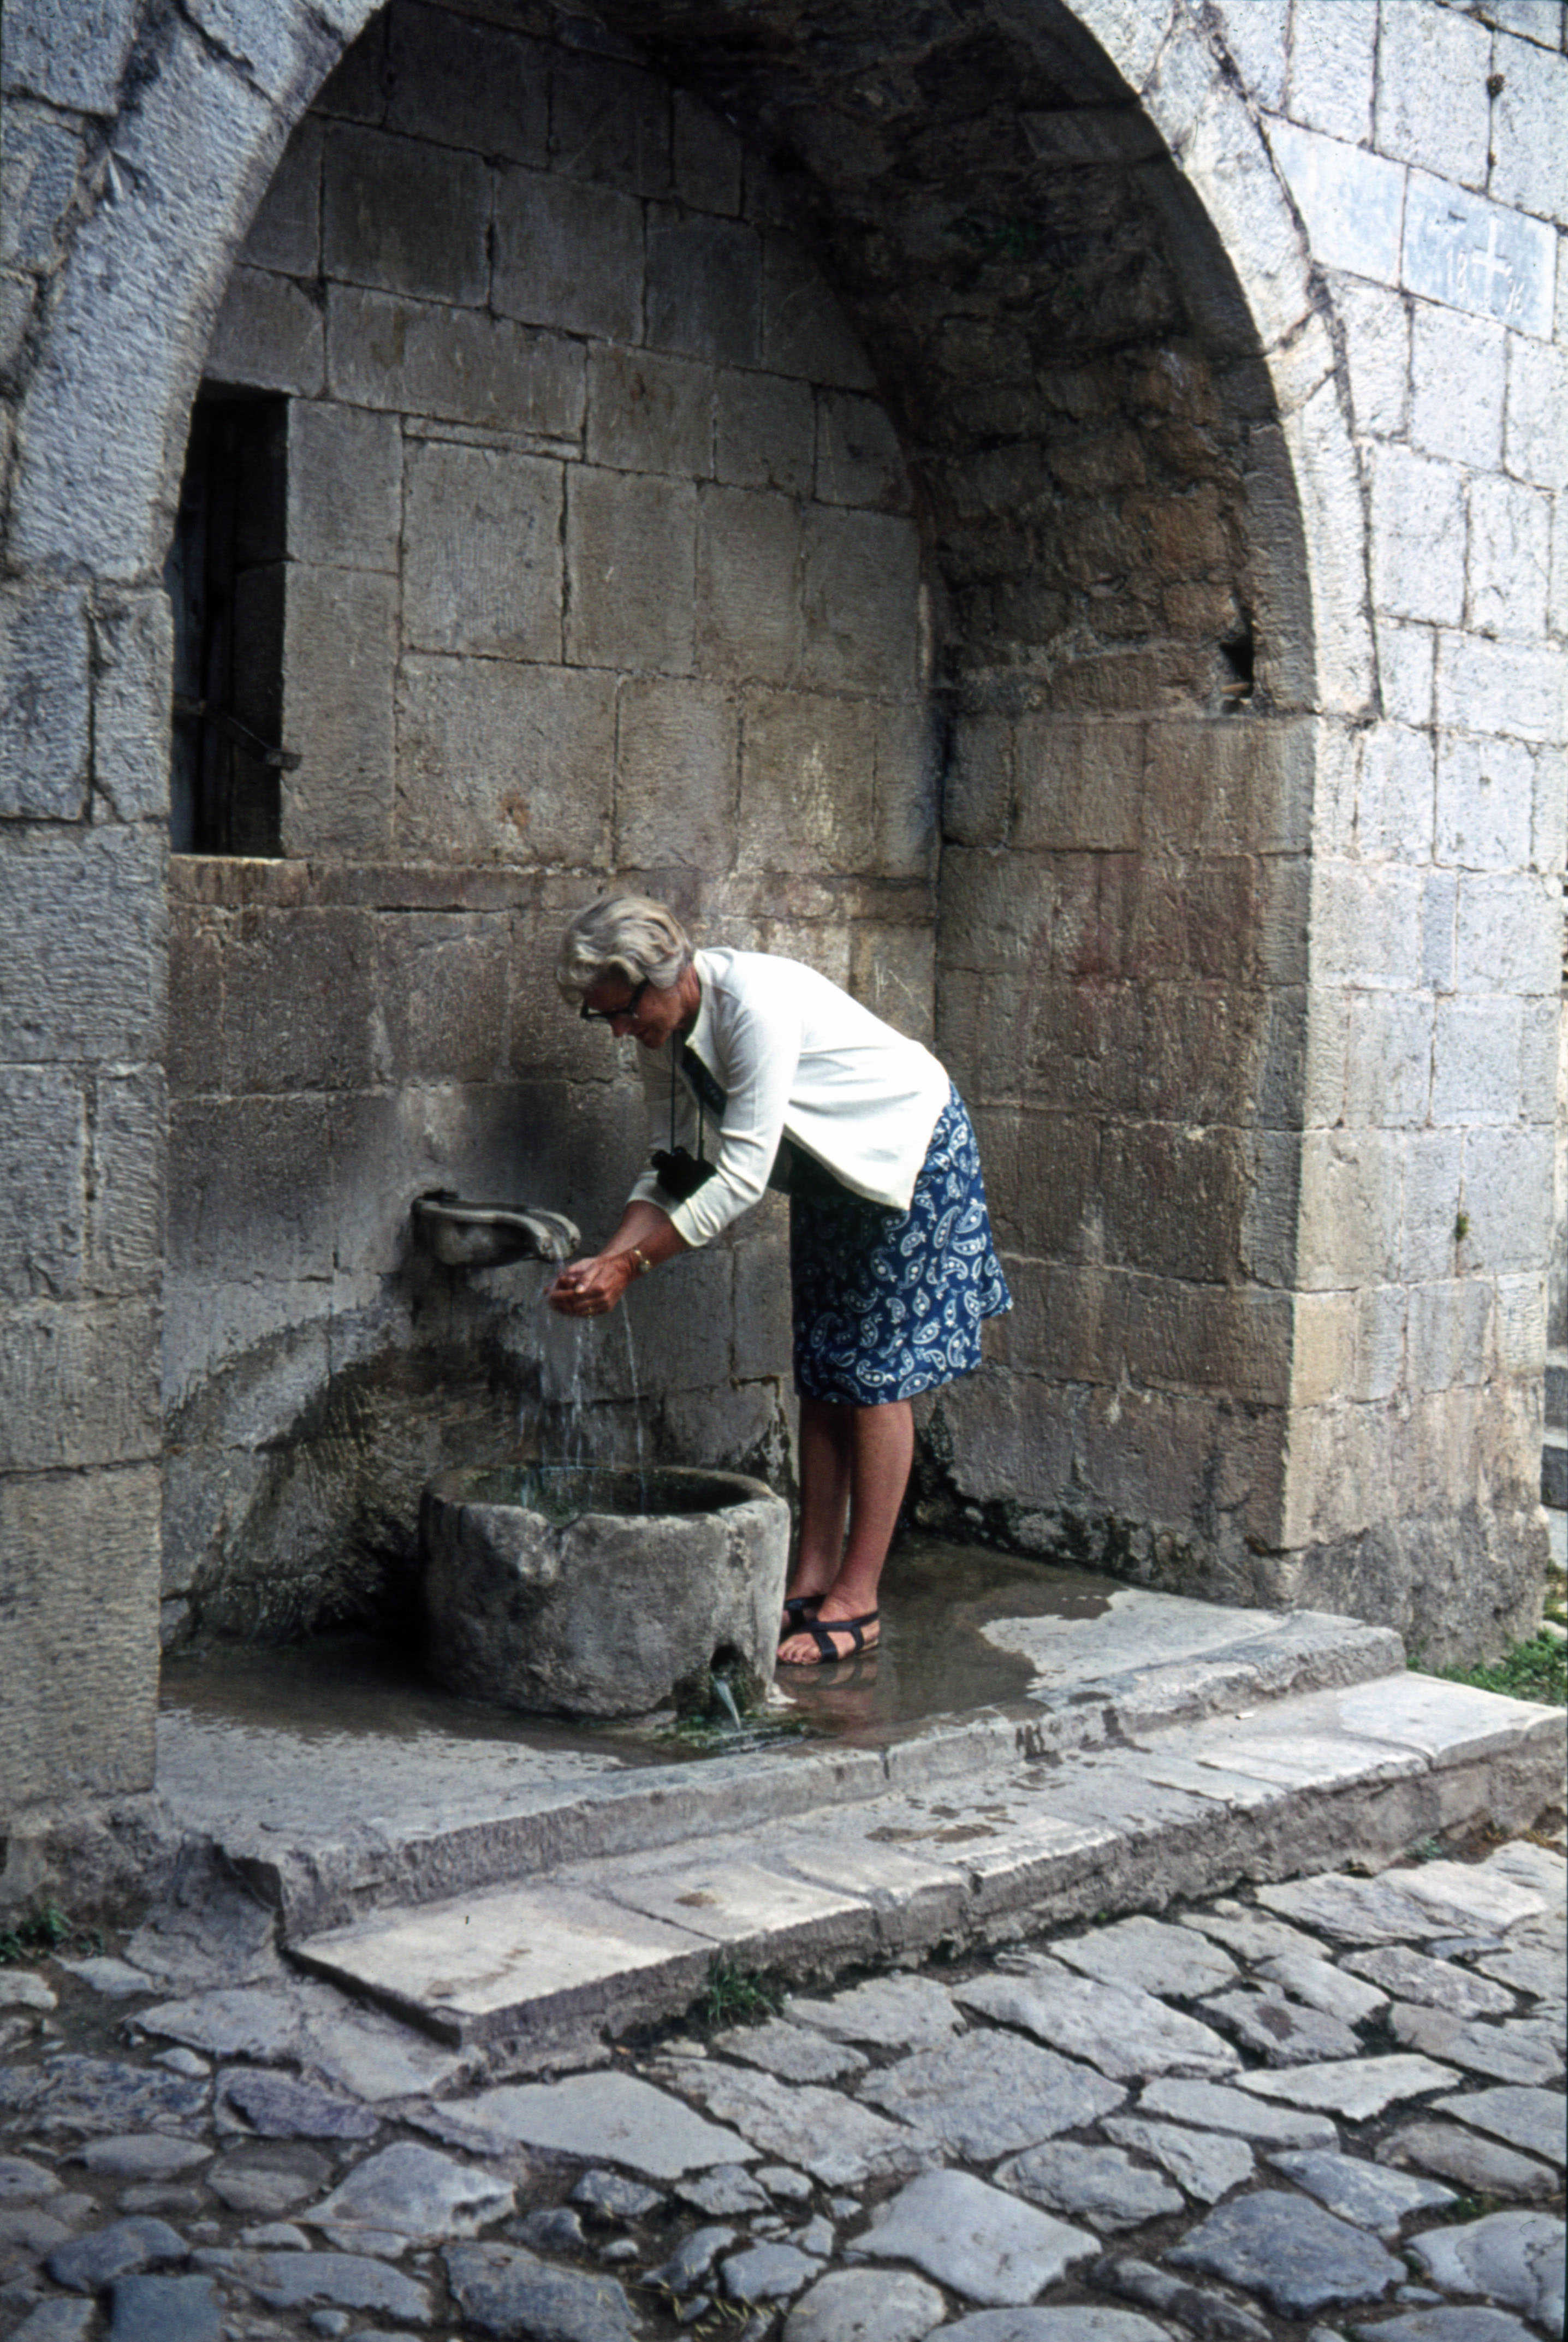 Summer 1965 Joan getting water from the Spring at Hosios Loukas Monastry in Greece